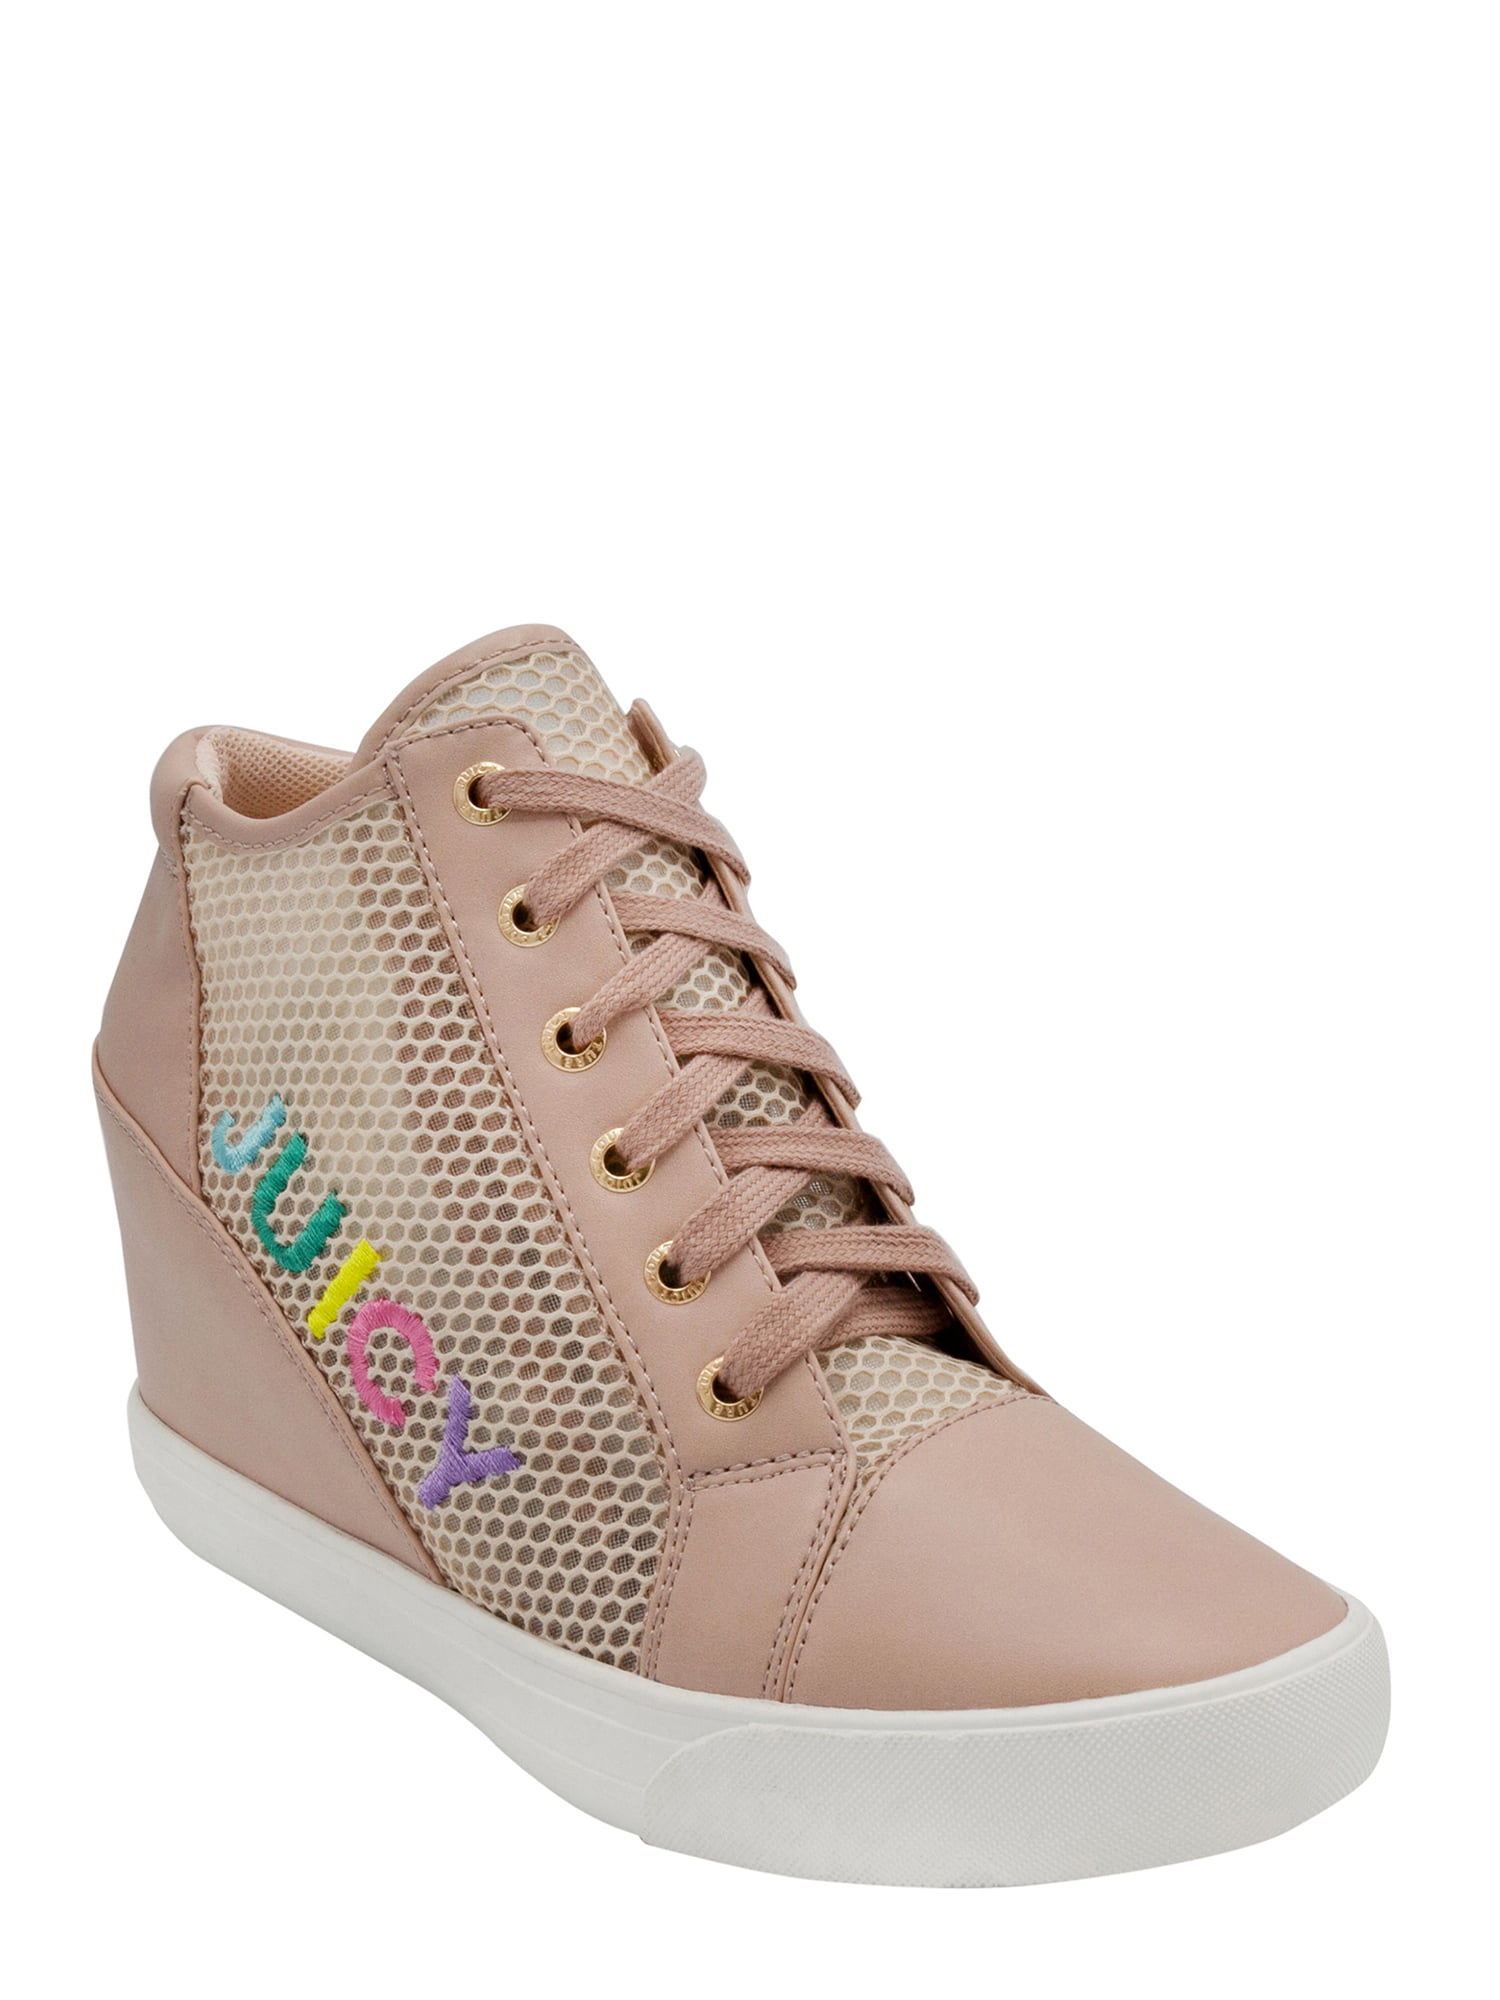 Buyr.com | Fashion Sneakers | Juicy Couture Deluxe Women Lace Up Fashion  Sneaker Casual Shoes Deluxe White Tie Dye 8.5